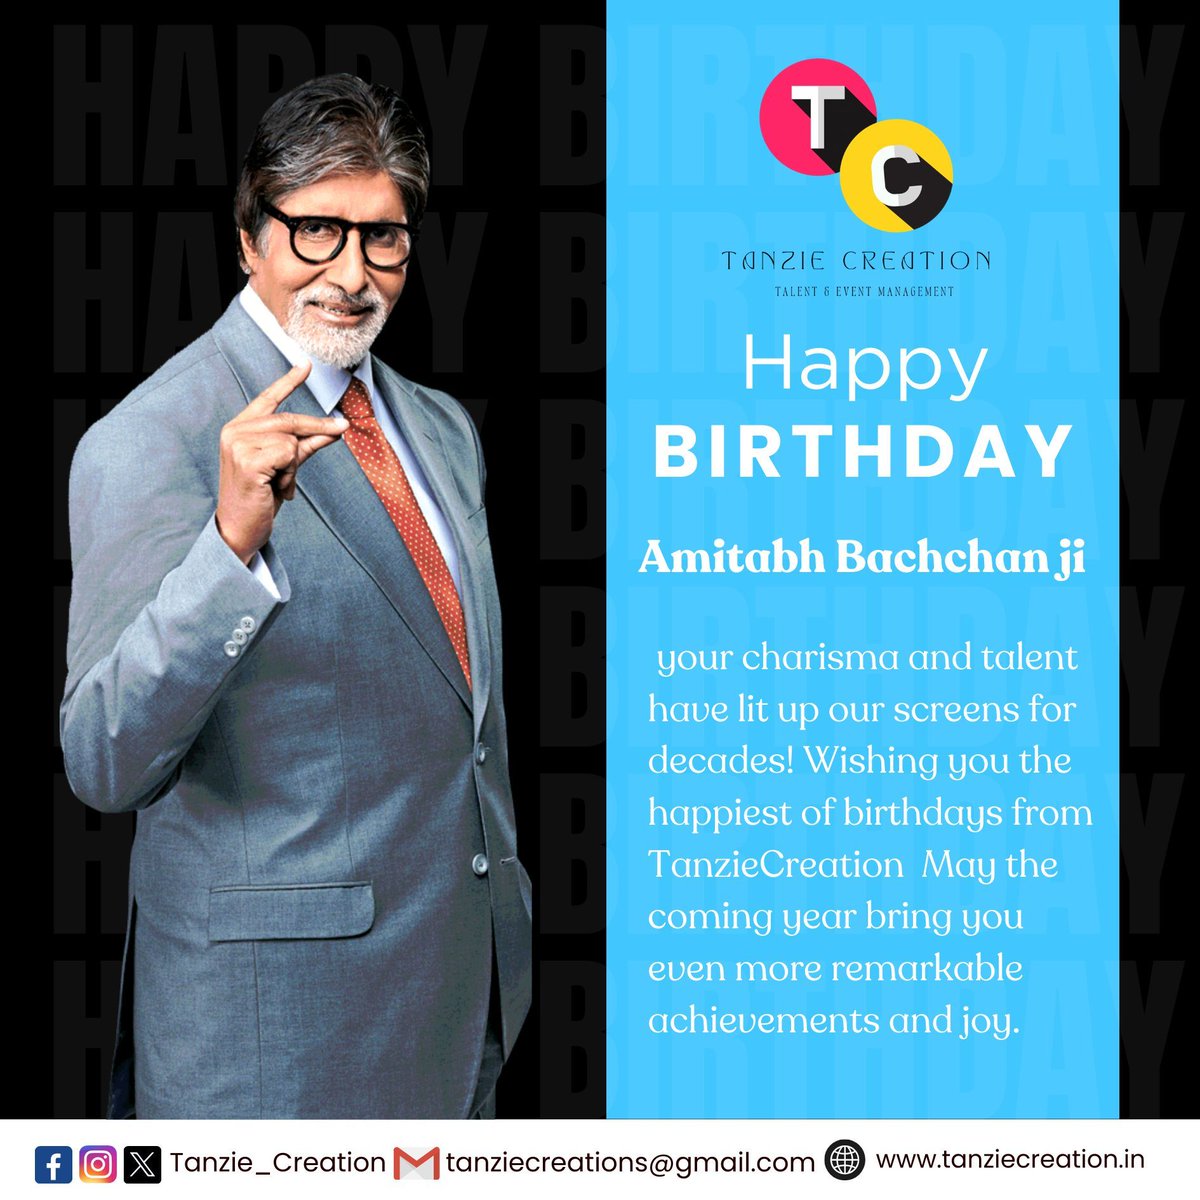 Wishing you a Very Happy Birthday Amitabh Bachchan sir, your charisma and talent have lit up our screens for decades! Wishing you the happiest of birthdays from Team TanzieCreation! 

 May the coming year bring you even more remarkable achievements and joy.

#HBDAmitabhBachchan